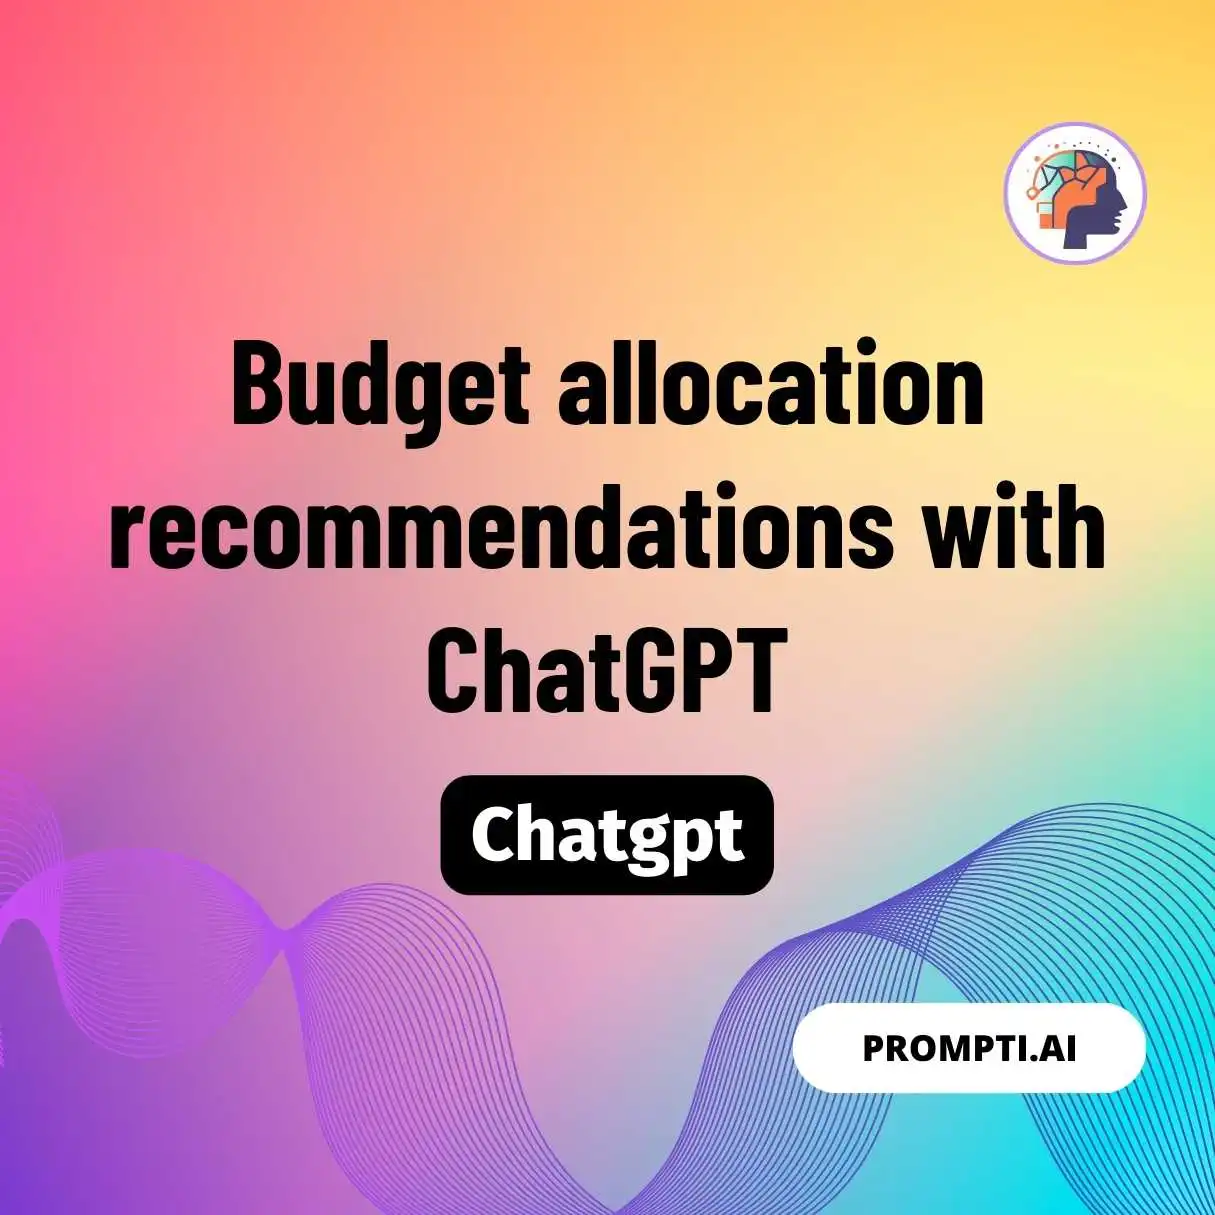 Budget allocation recommendations with ChatGPT